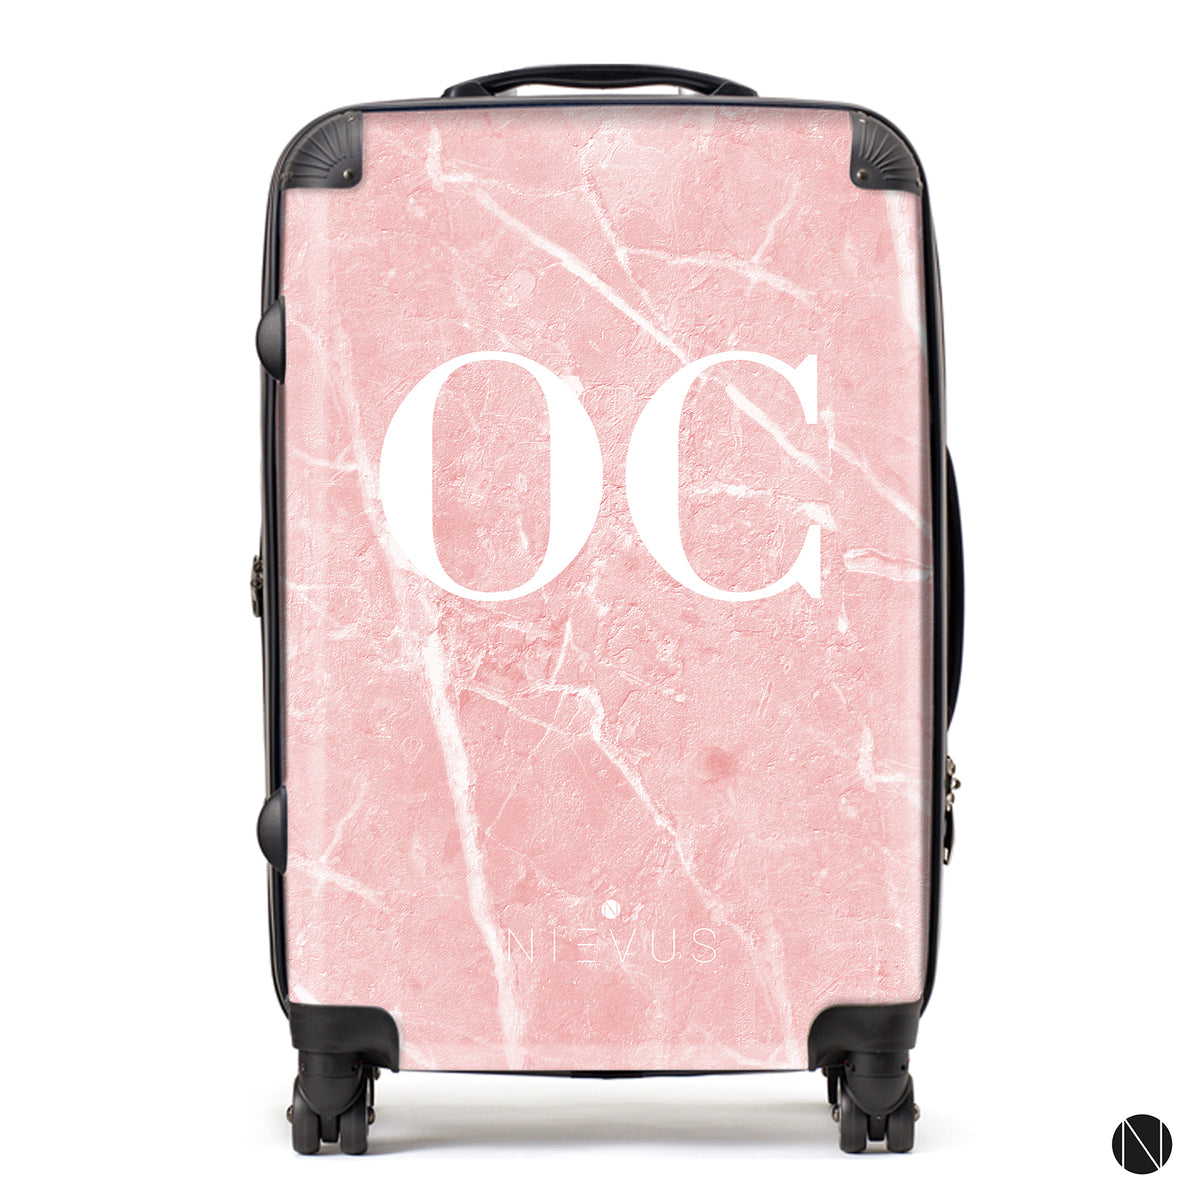 The Personalised Marble Suitcase - Pink Edition